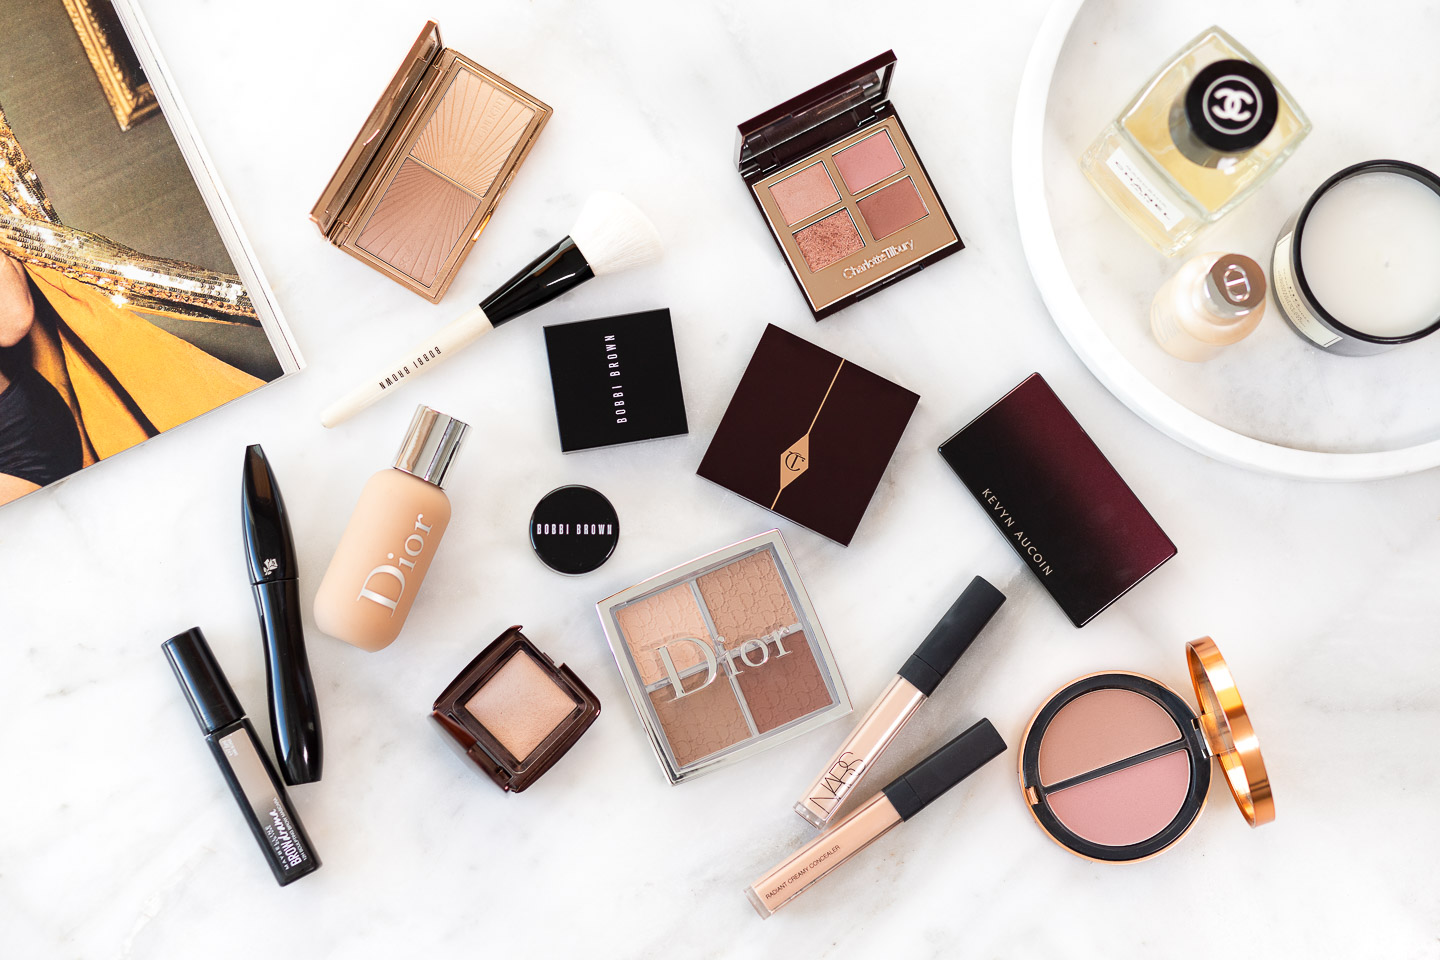 FAVOURITE MAKEUP PRODUCTS I’VE TRIED LATELY